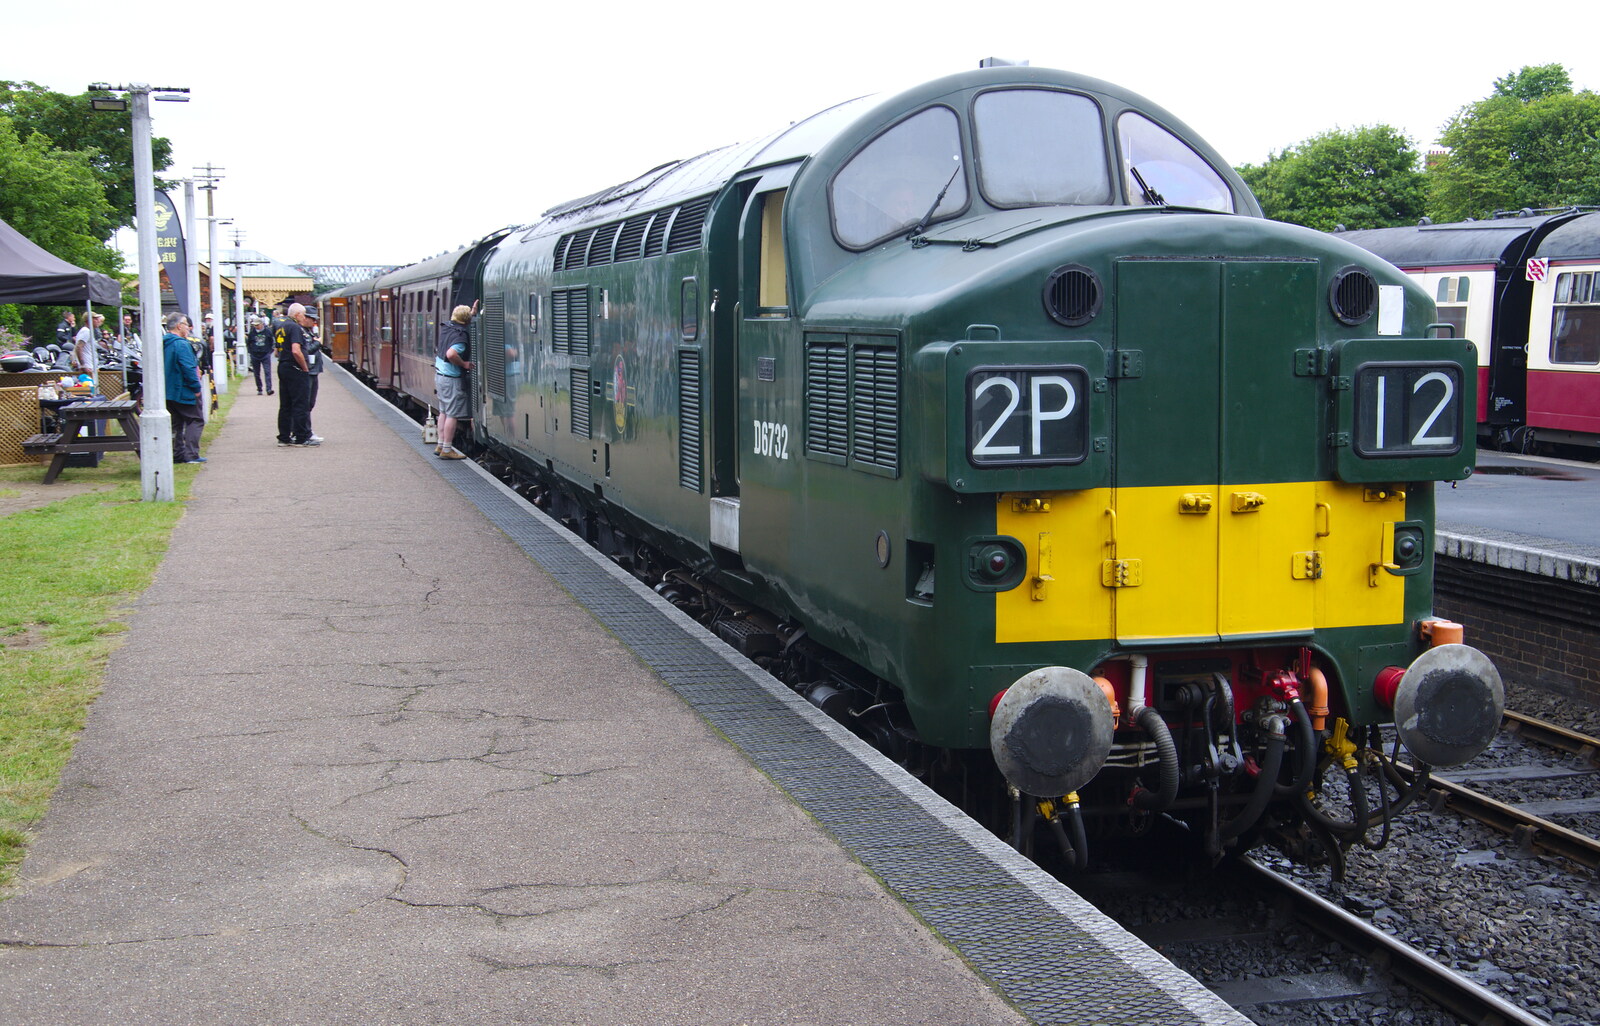 Class 37 D6732 on the platform at Sheringham from Kelling Camping and the Potty Morris Festival, Sheringham, North Norfolk - 6th July 2019